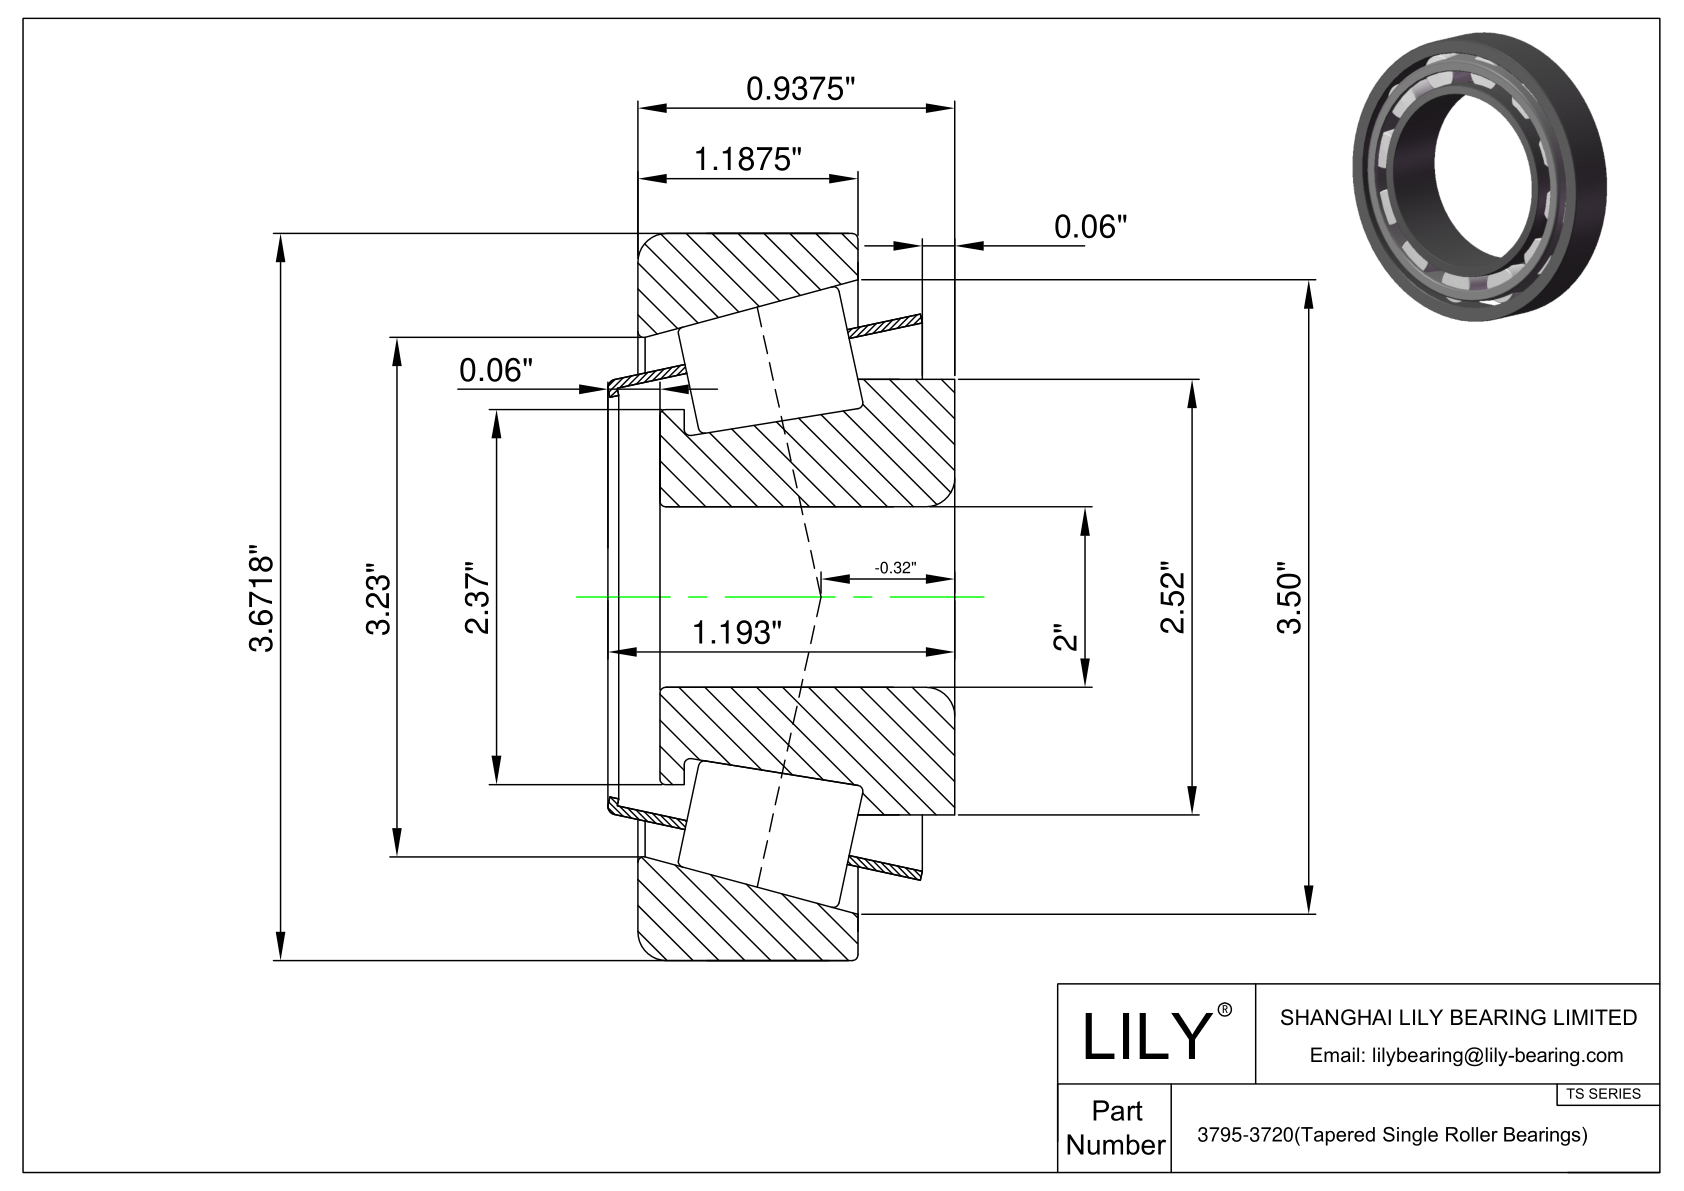 3795-3720 TS (Tapered Single Roller Bearings) (Imperial) cad drawing